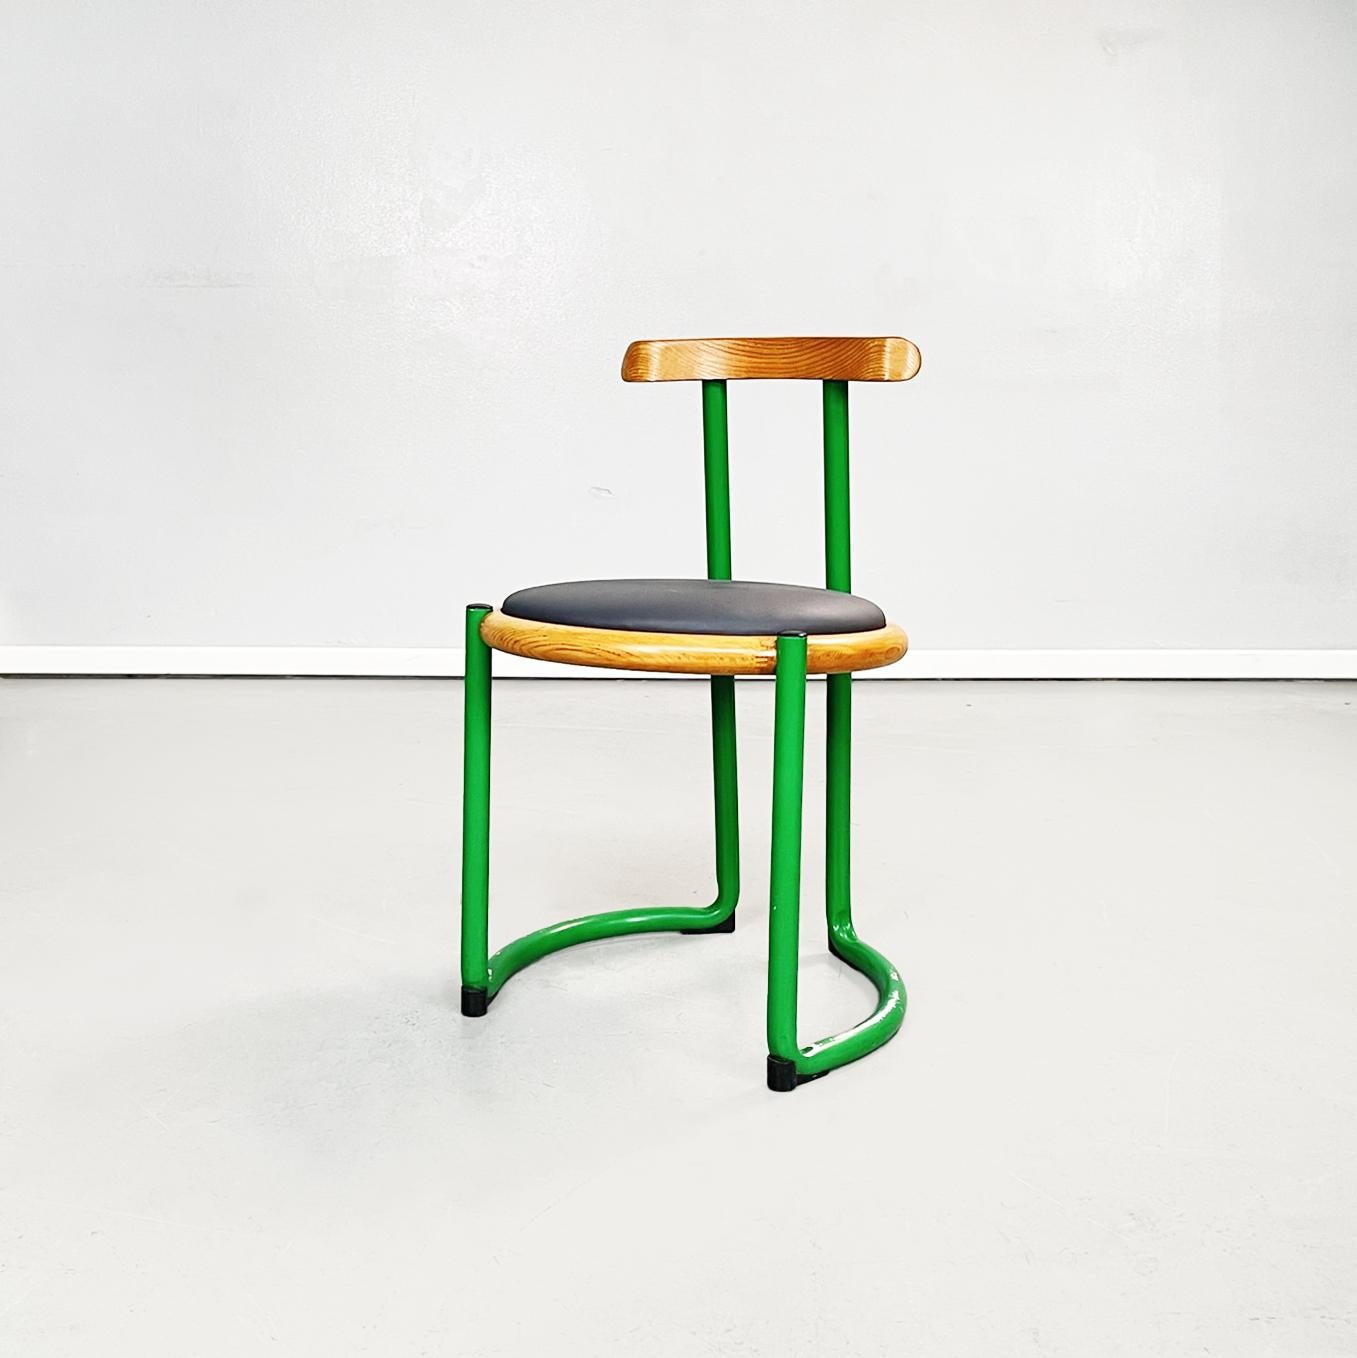 Italian mid-century round green metal, leather and wood chairs by Tito Agnoli, 1950s
Set of 7 round chairs in wood, metal and leather. The seat is made up of a padded cushion covered in gray sky, inserted in a round wooden structure. The backrest is